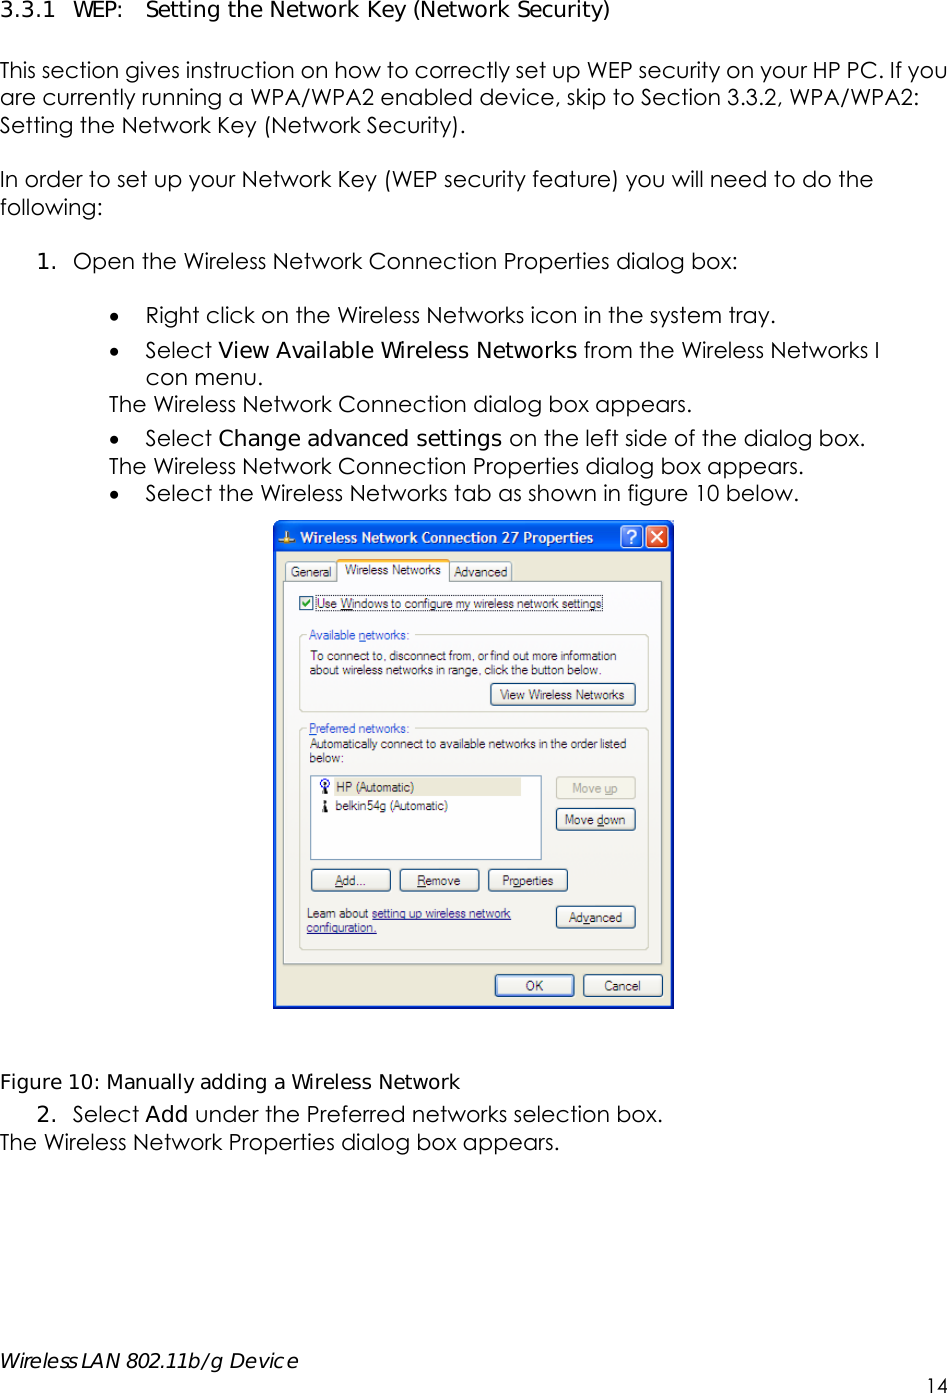     Wireless LAN 802.11b/g Device        14 3.3.1 WEP:  Setting the Network Key (Network Security)  This section gives instruction on how to correctly set up WEP security on your HP PC. If you are currently running a WPA/WPA2 enabled device, skip to Section 3.3.2, WPA/WPA2: Setting the Network Key (Network Security).    In order to set up your Network Key (WEP security feature) you will need to do the following:  1. Open the Wireless Network Connection Properties dialog box:   Right click on the Wireless Networks icon in the system tray.  Select View Available Wireless Networks from the Wireless Networks I con menu. The Wireless Network Connection dialog box appears.  Select Change advanced settings on the left side of the dialog box. The Wireless Network Connection Properties dialog box appears.  Select the Wireless Networks tab as shown in figure 10 below.   Figure 10: Manually adding a Wireless Network  2. Select Add under the Preferred networks selection box.   The Wireless Network Properties dialog box appears.  